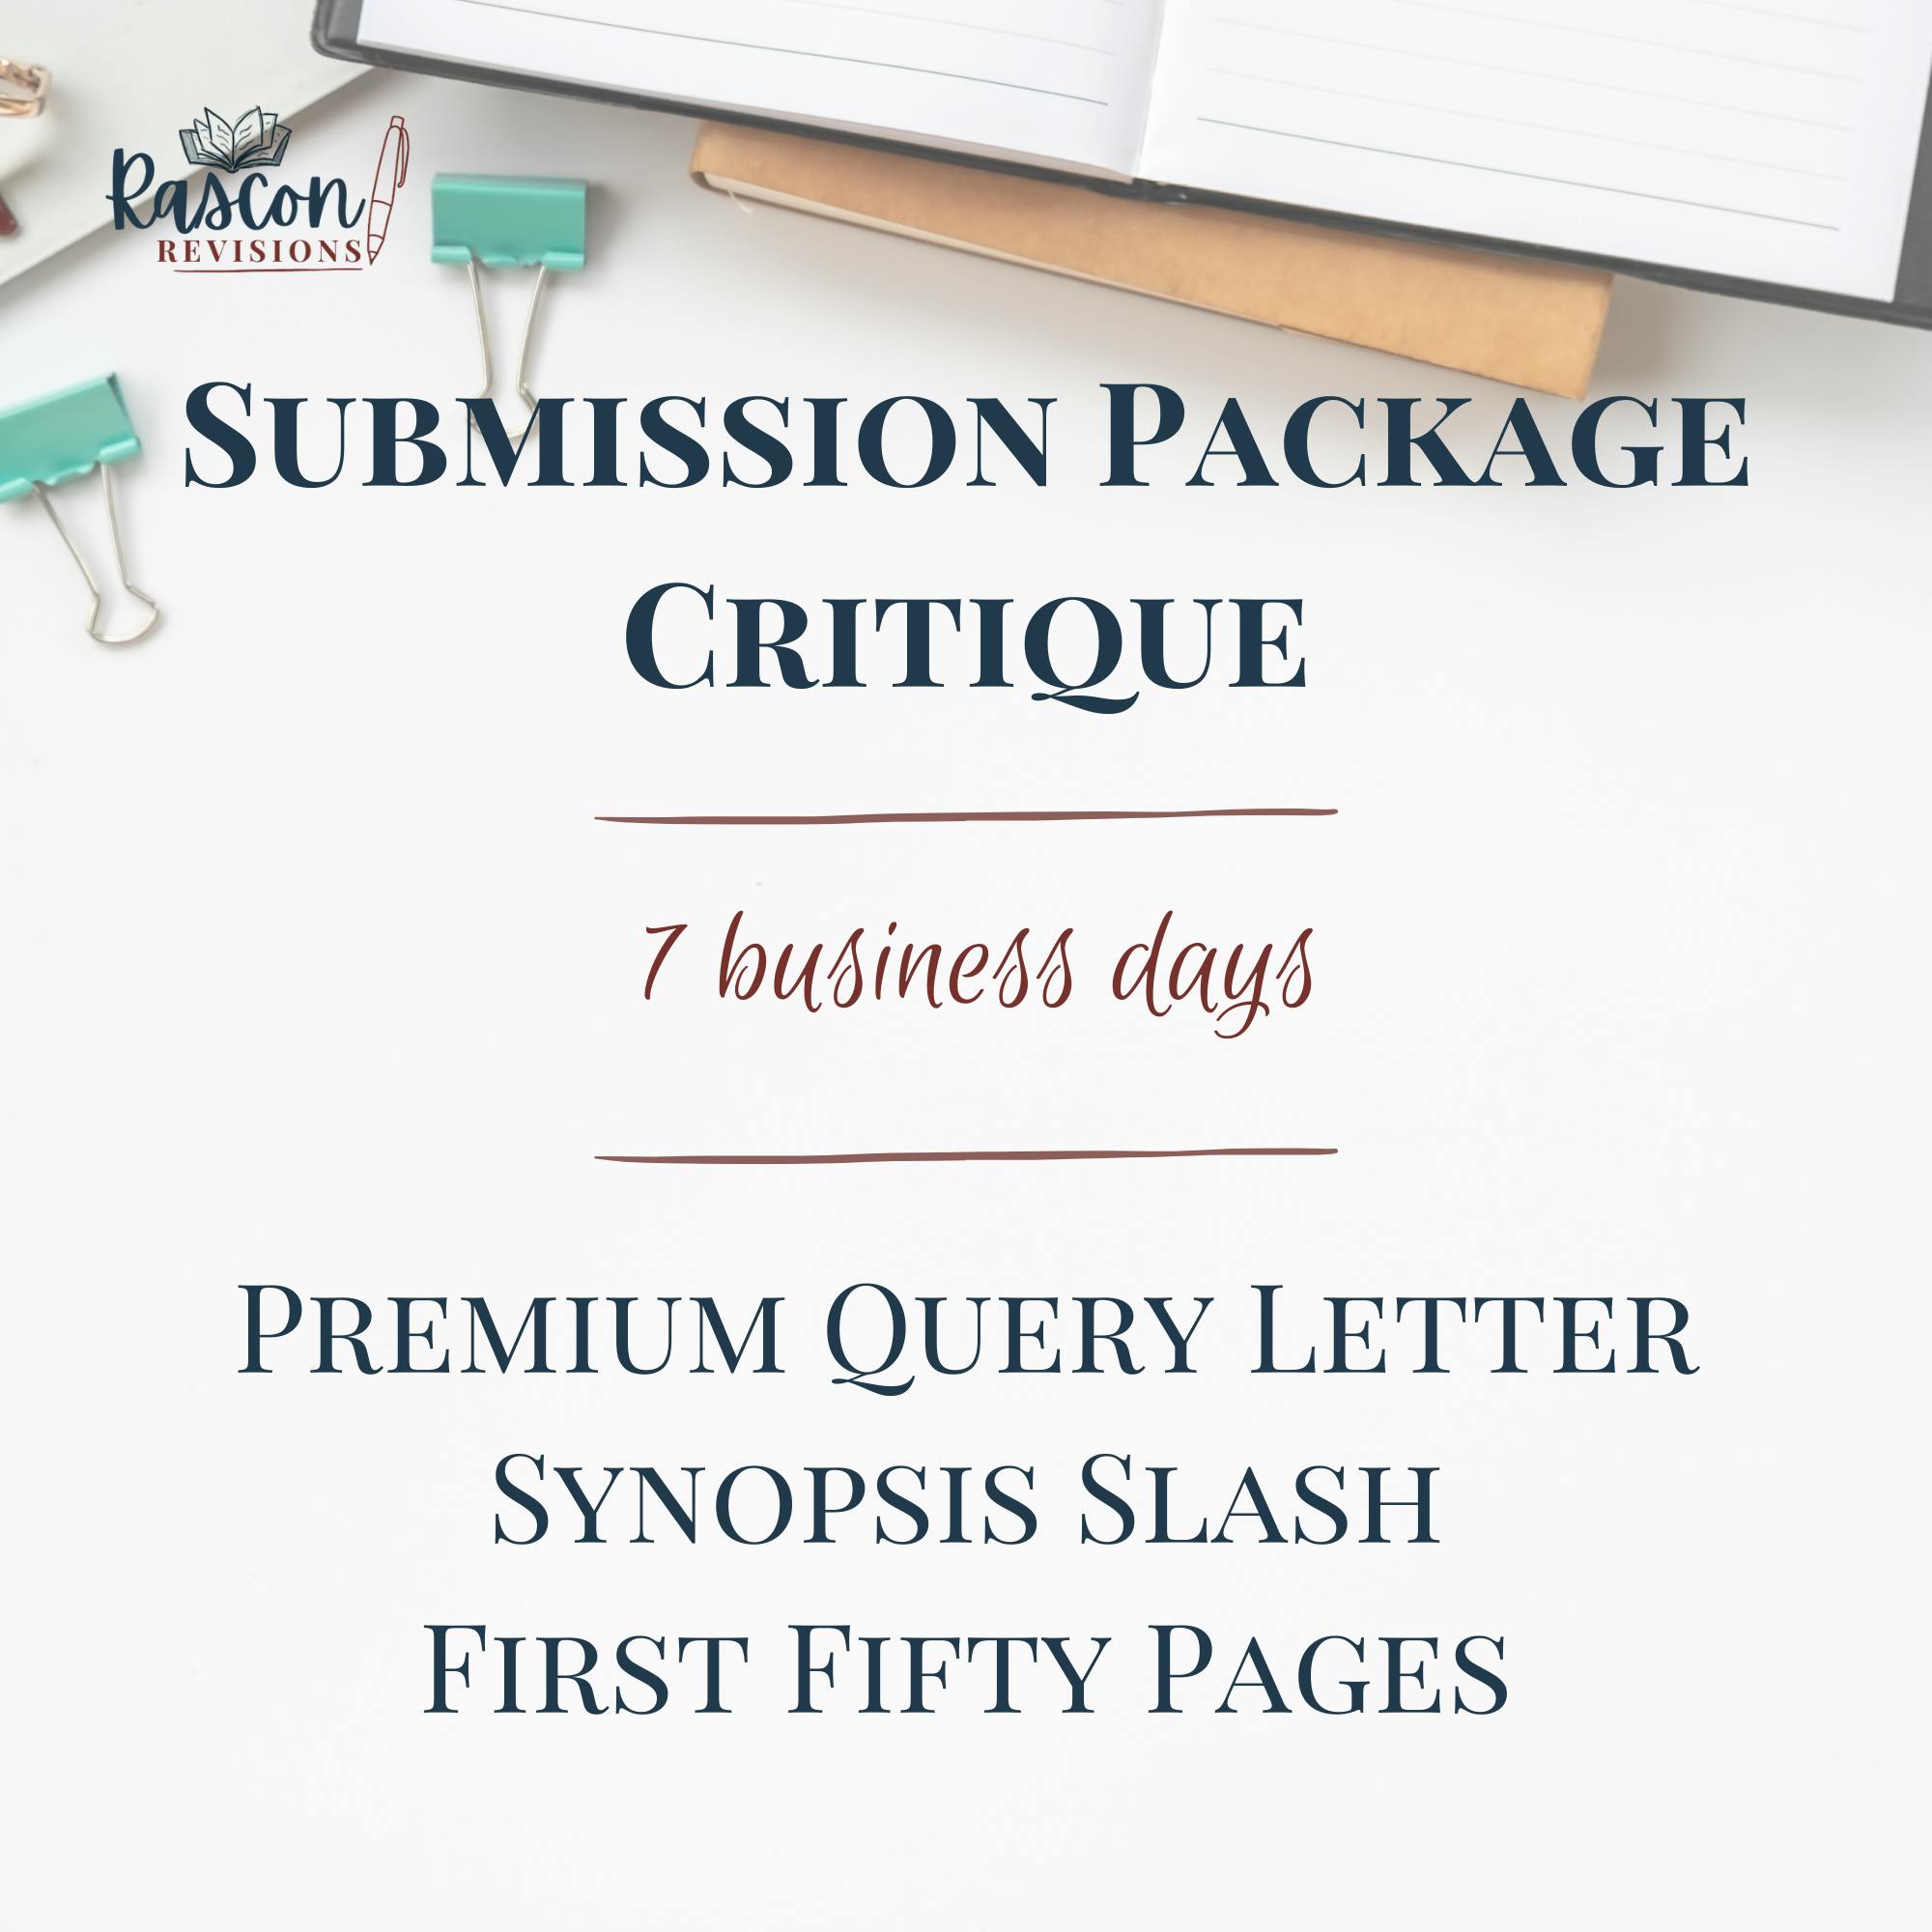 Submission Package Critique